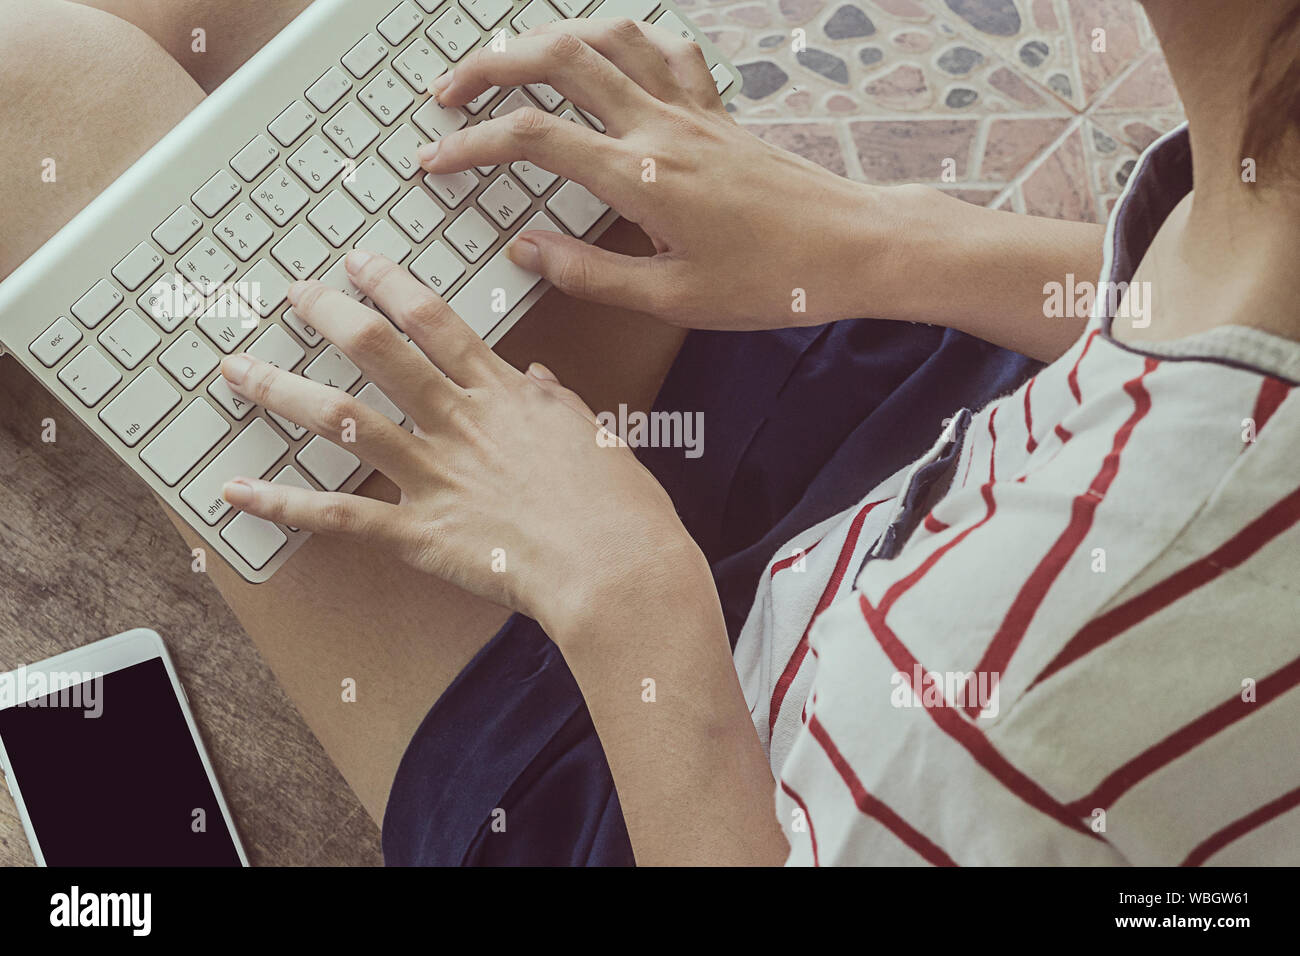 High Angle View Of Woman Typing Stock Photo